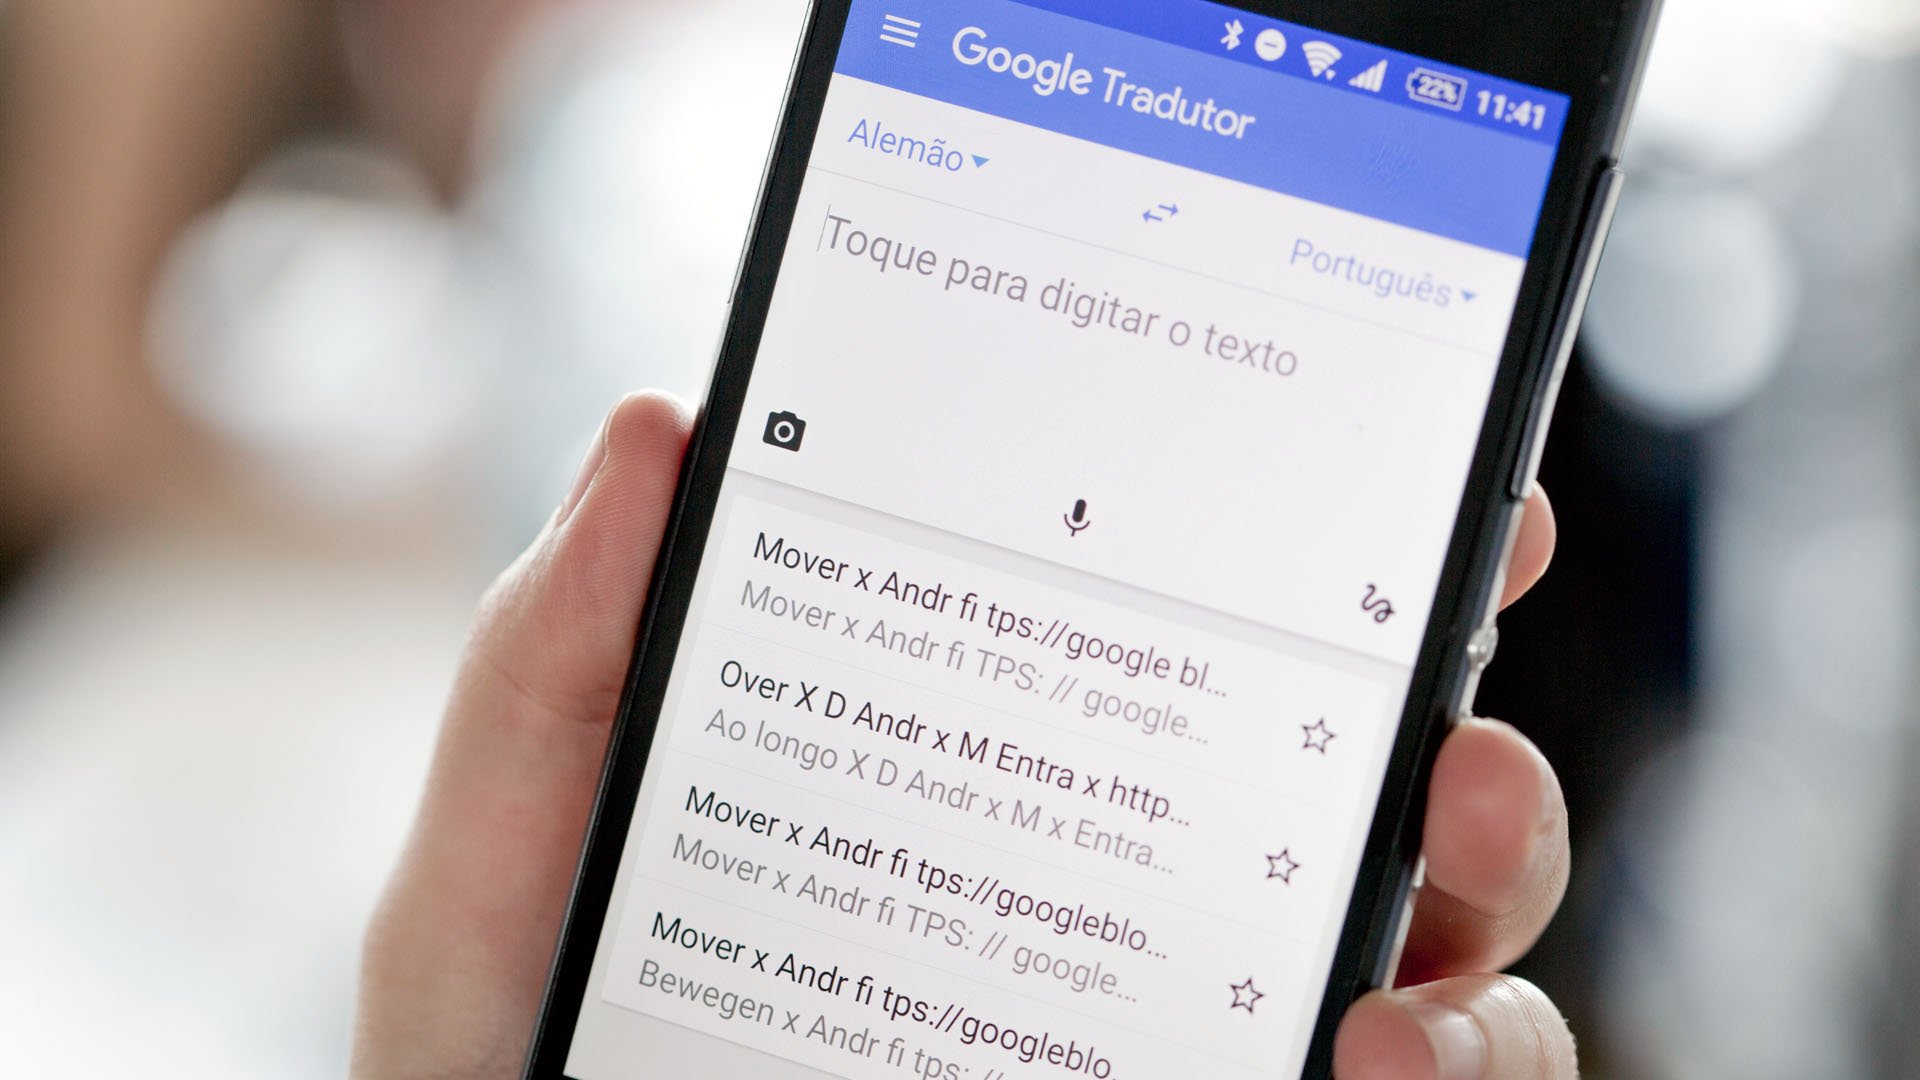 Three features already available on Google Translate that can optimize your day